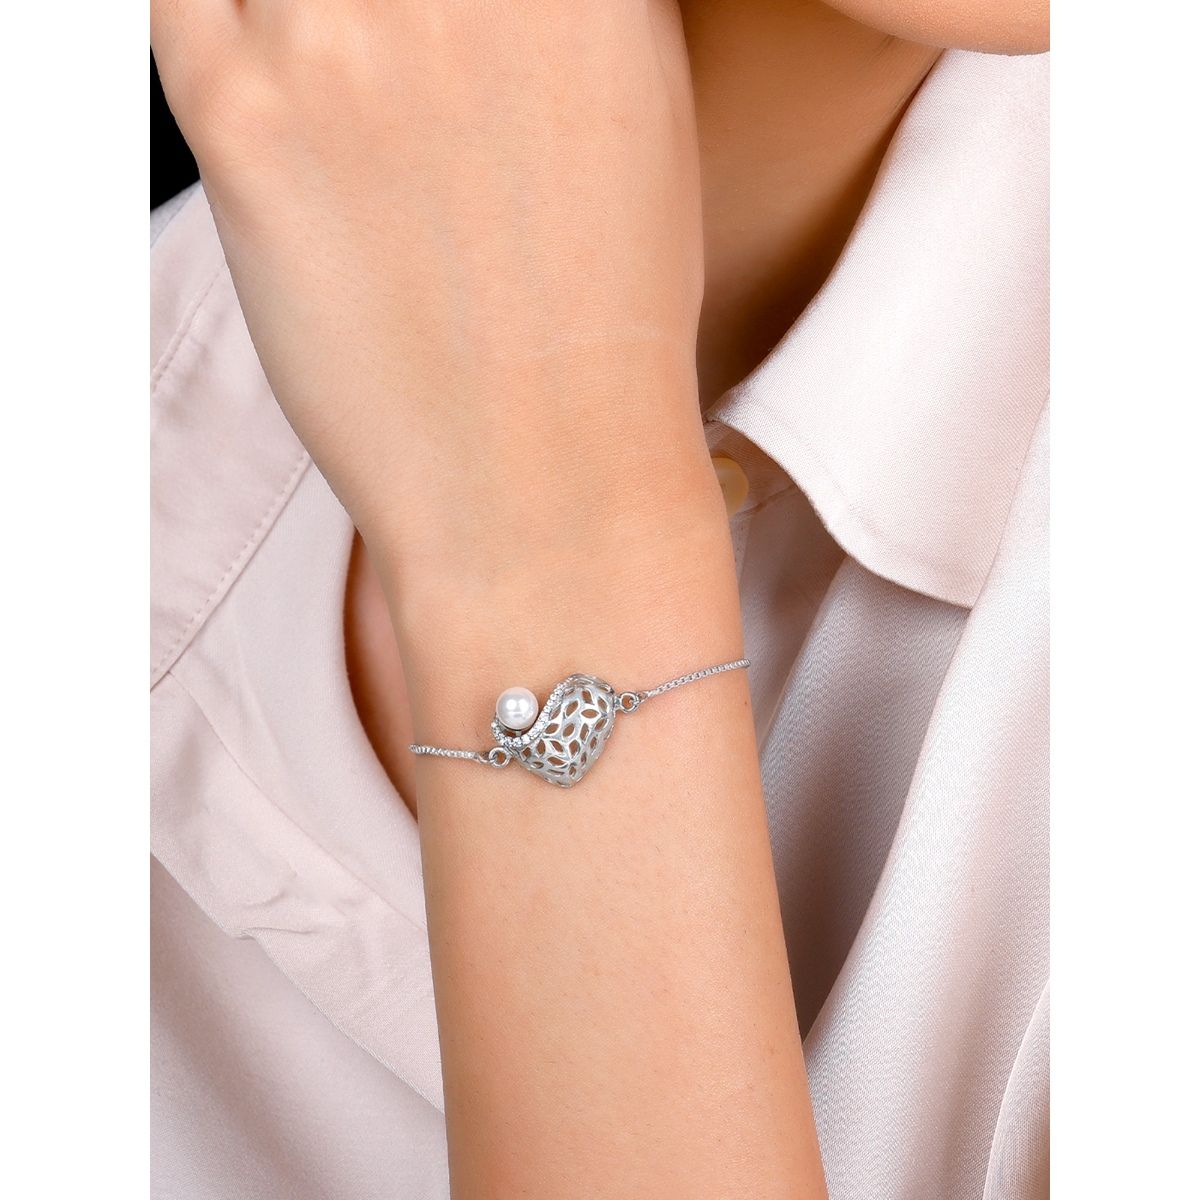 Attractive Heart Charm Toggle Bracelet